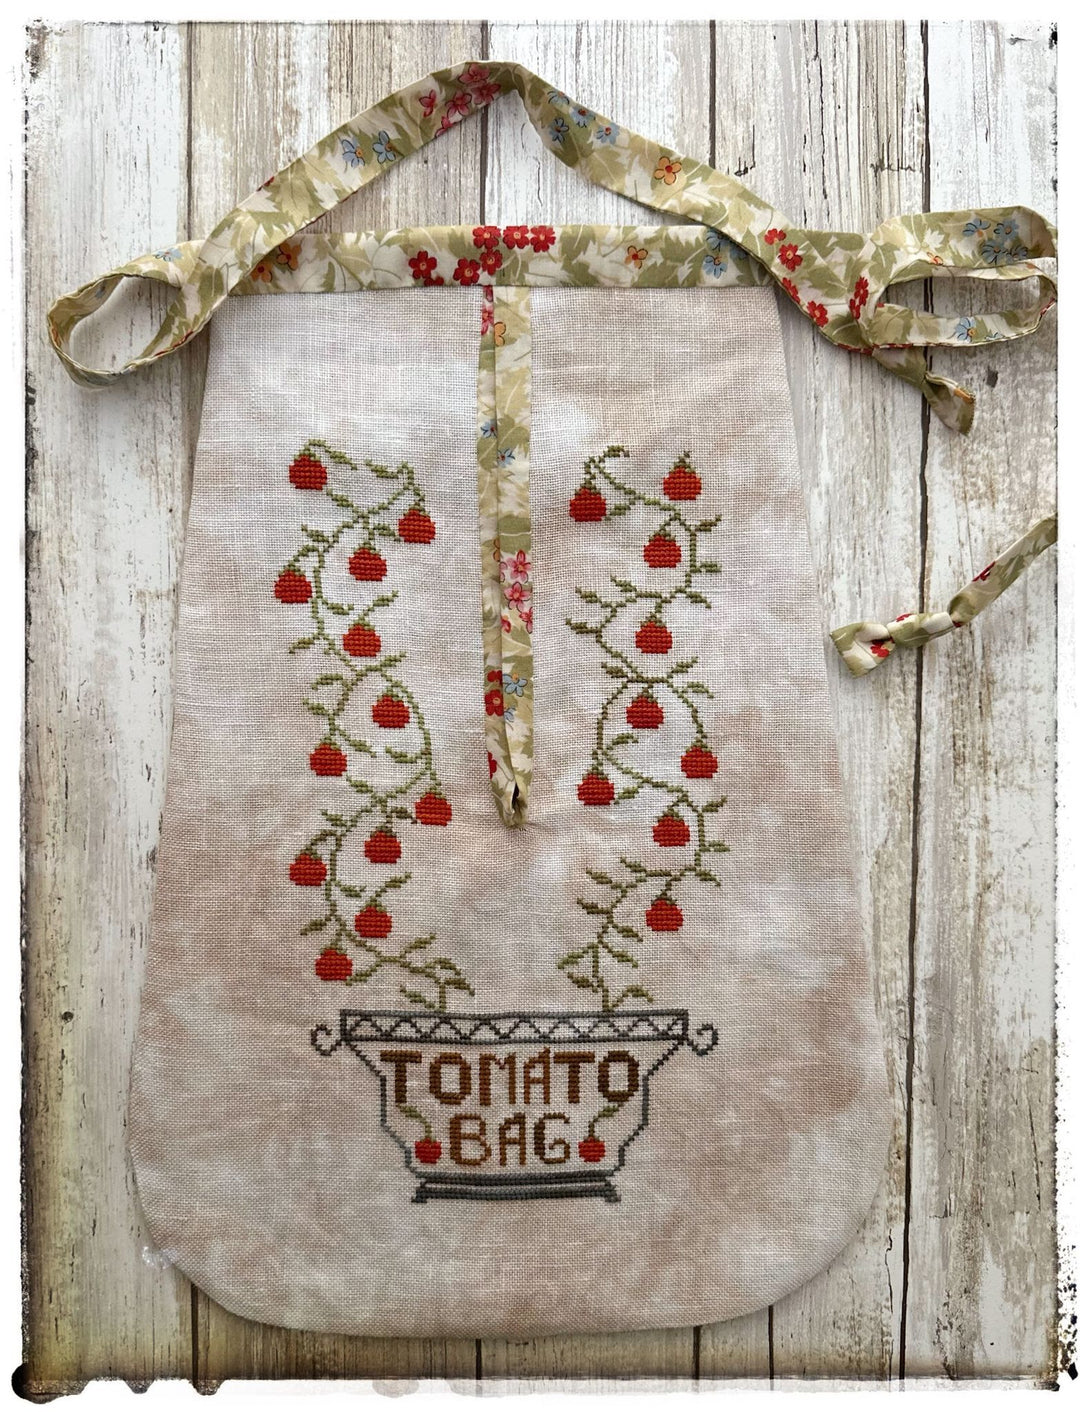 Pre-Order: Tomato Bag | Lucy Beam (Nashville Market - ships in March)